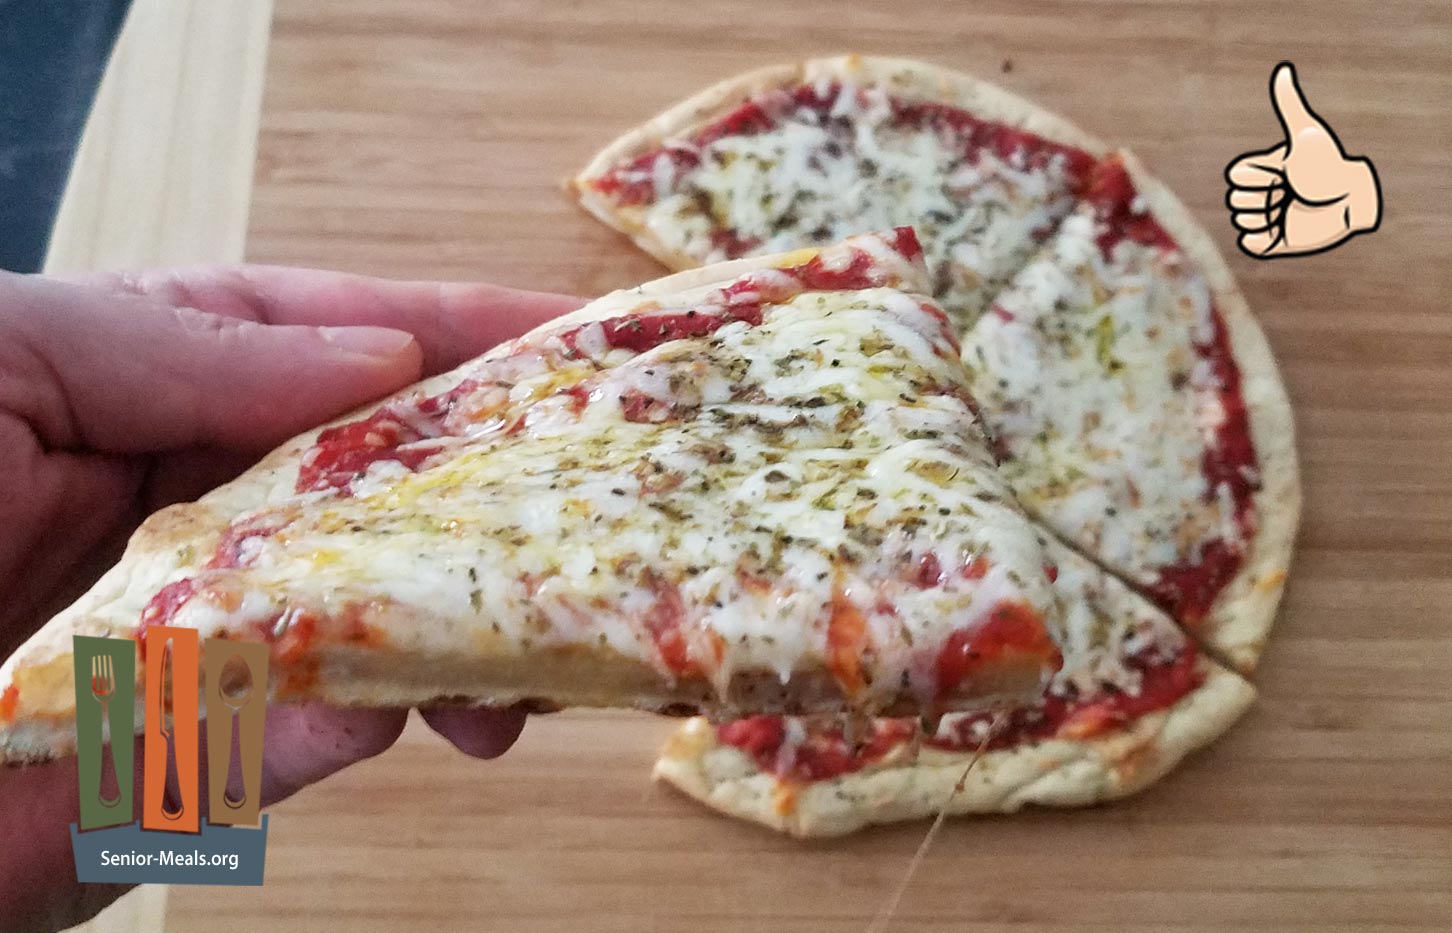 Zero Carb Pizza Crust - As good as any frozen pizza you might buy with no effect on blood sugars!